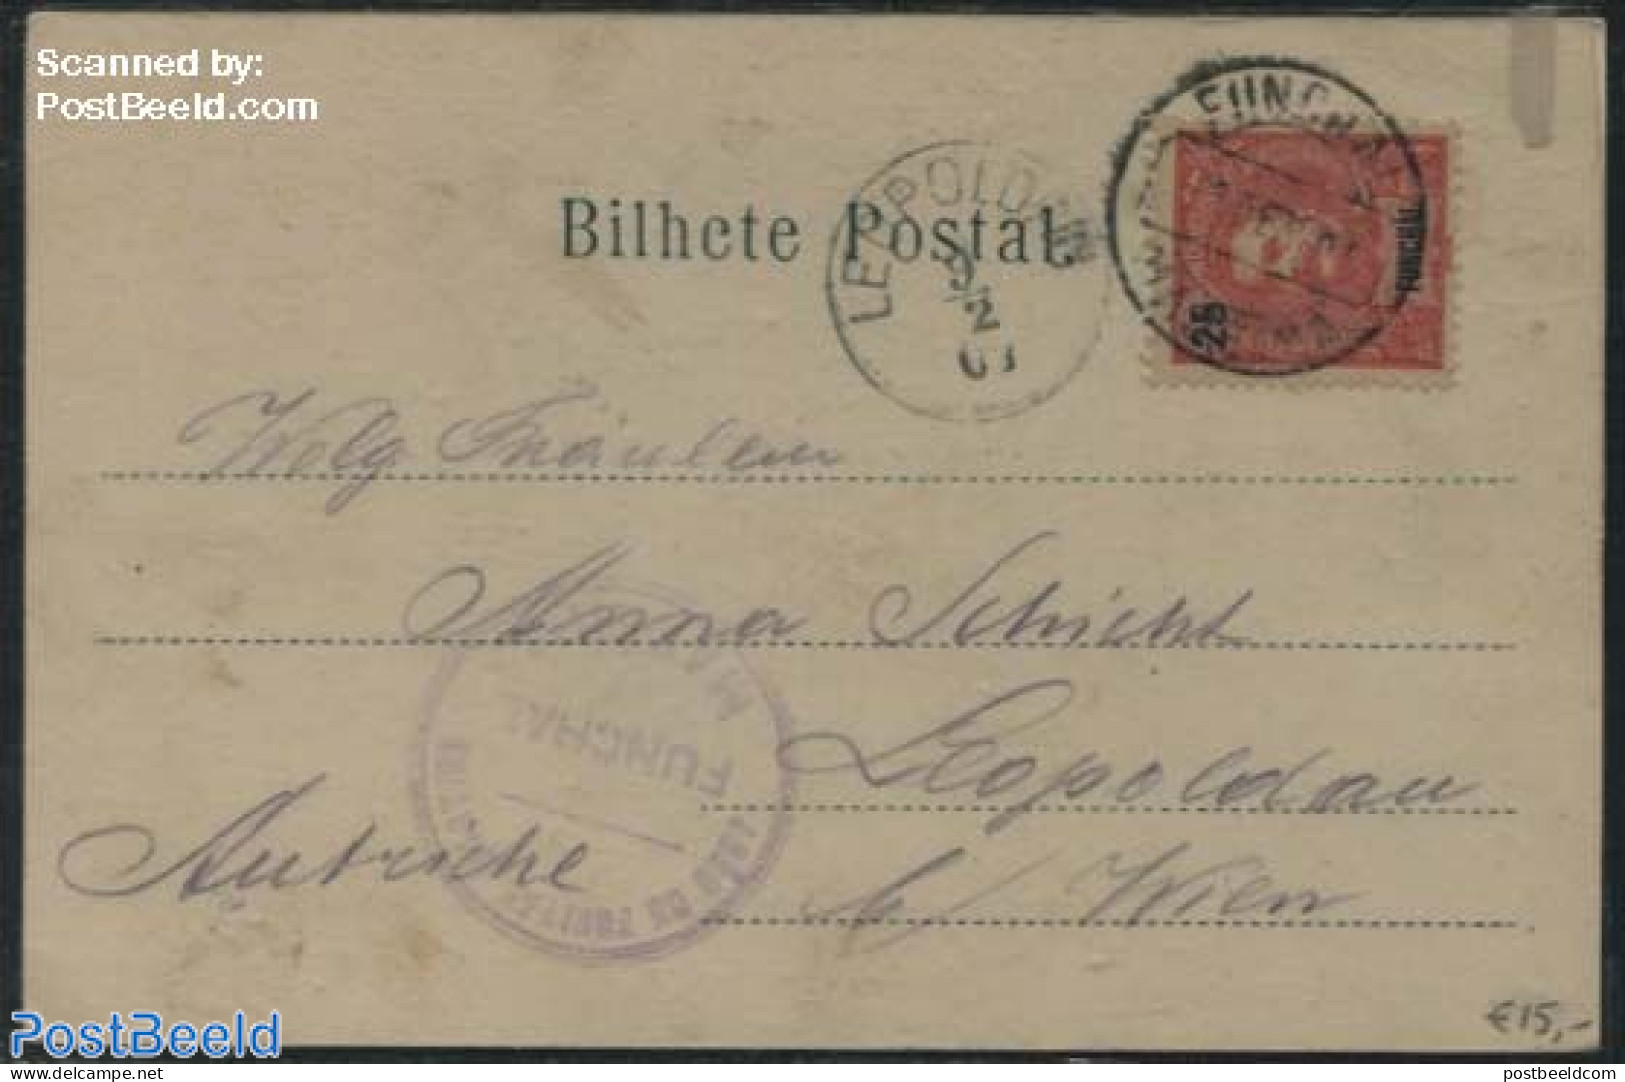 Madeira 1904 Postcard From Funchal To Vienna, Postal History - Madeira